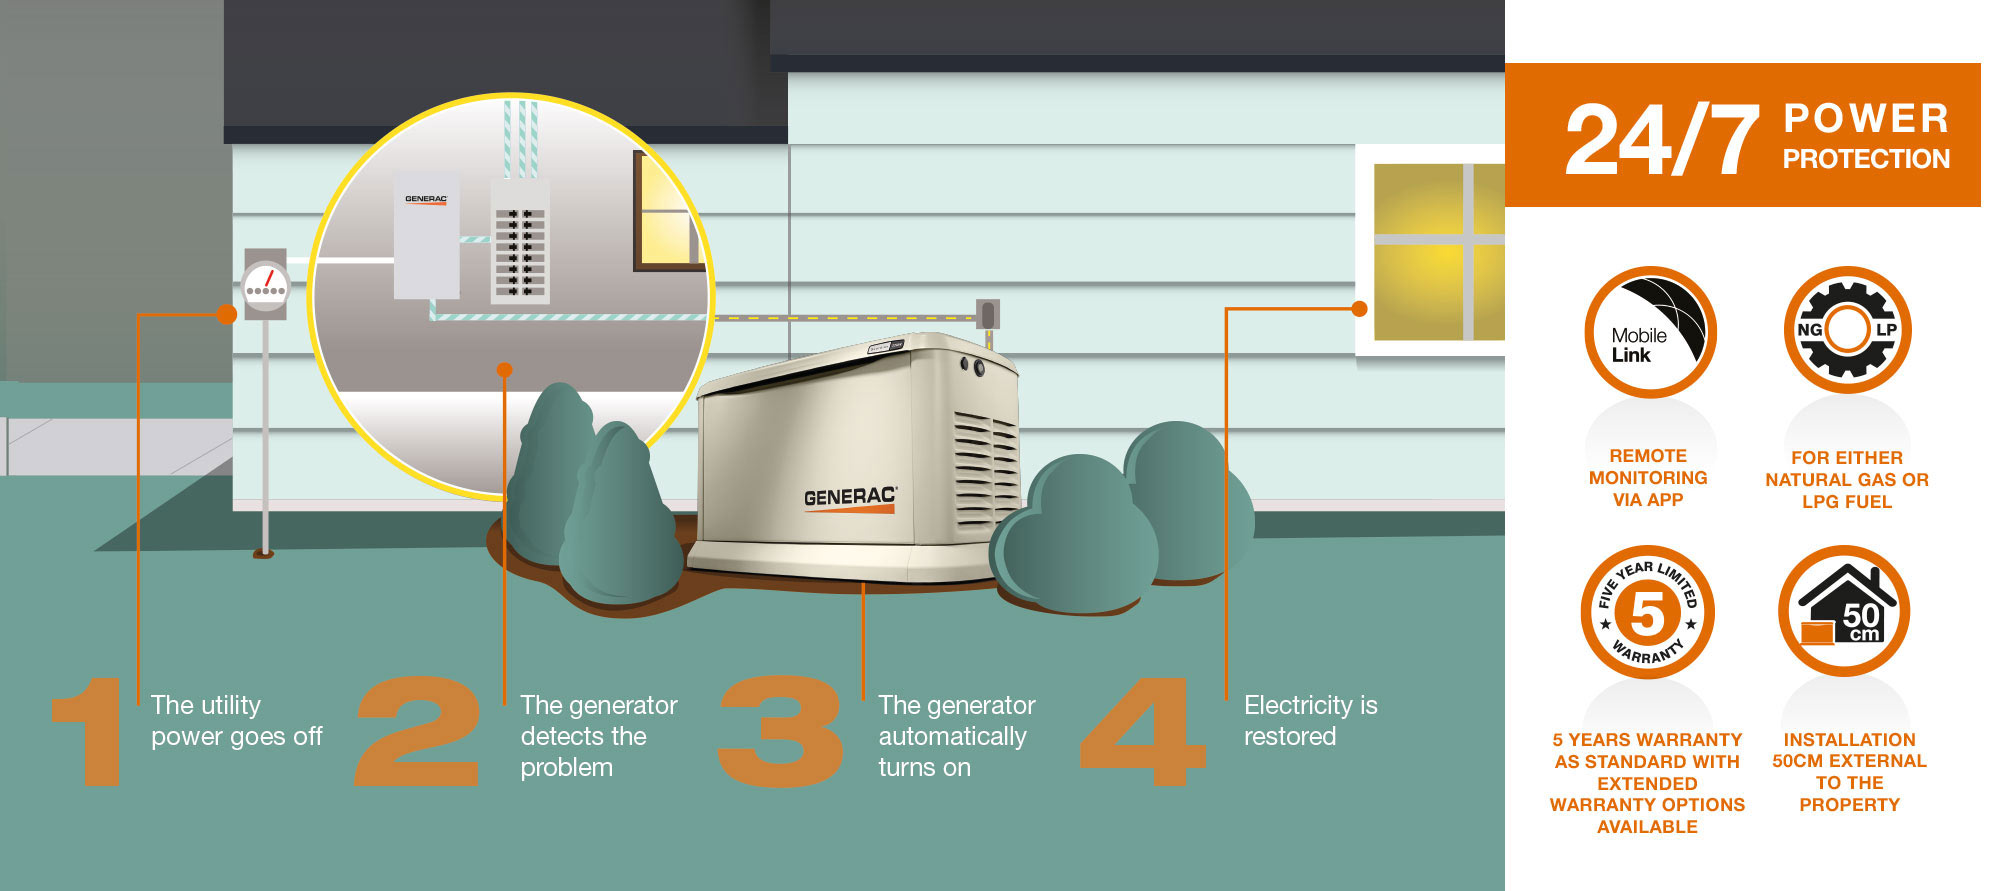 OffGrid Uninterruptible Electricity provided by Generac or their dealer network.